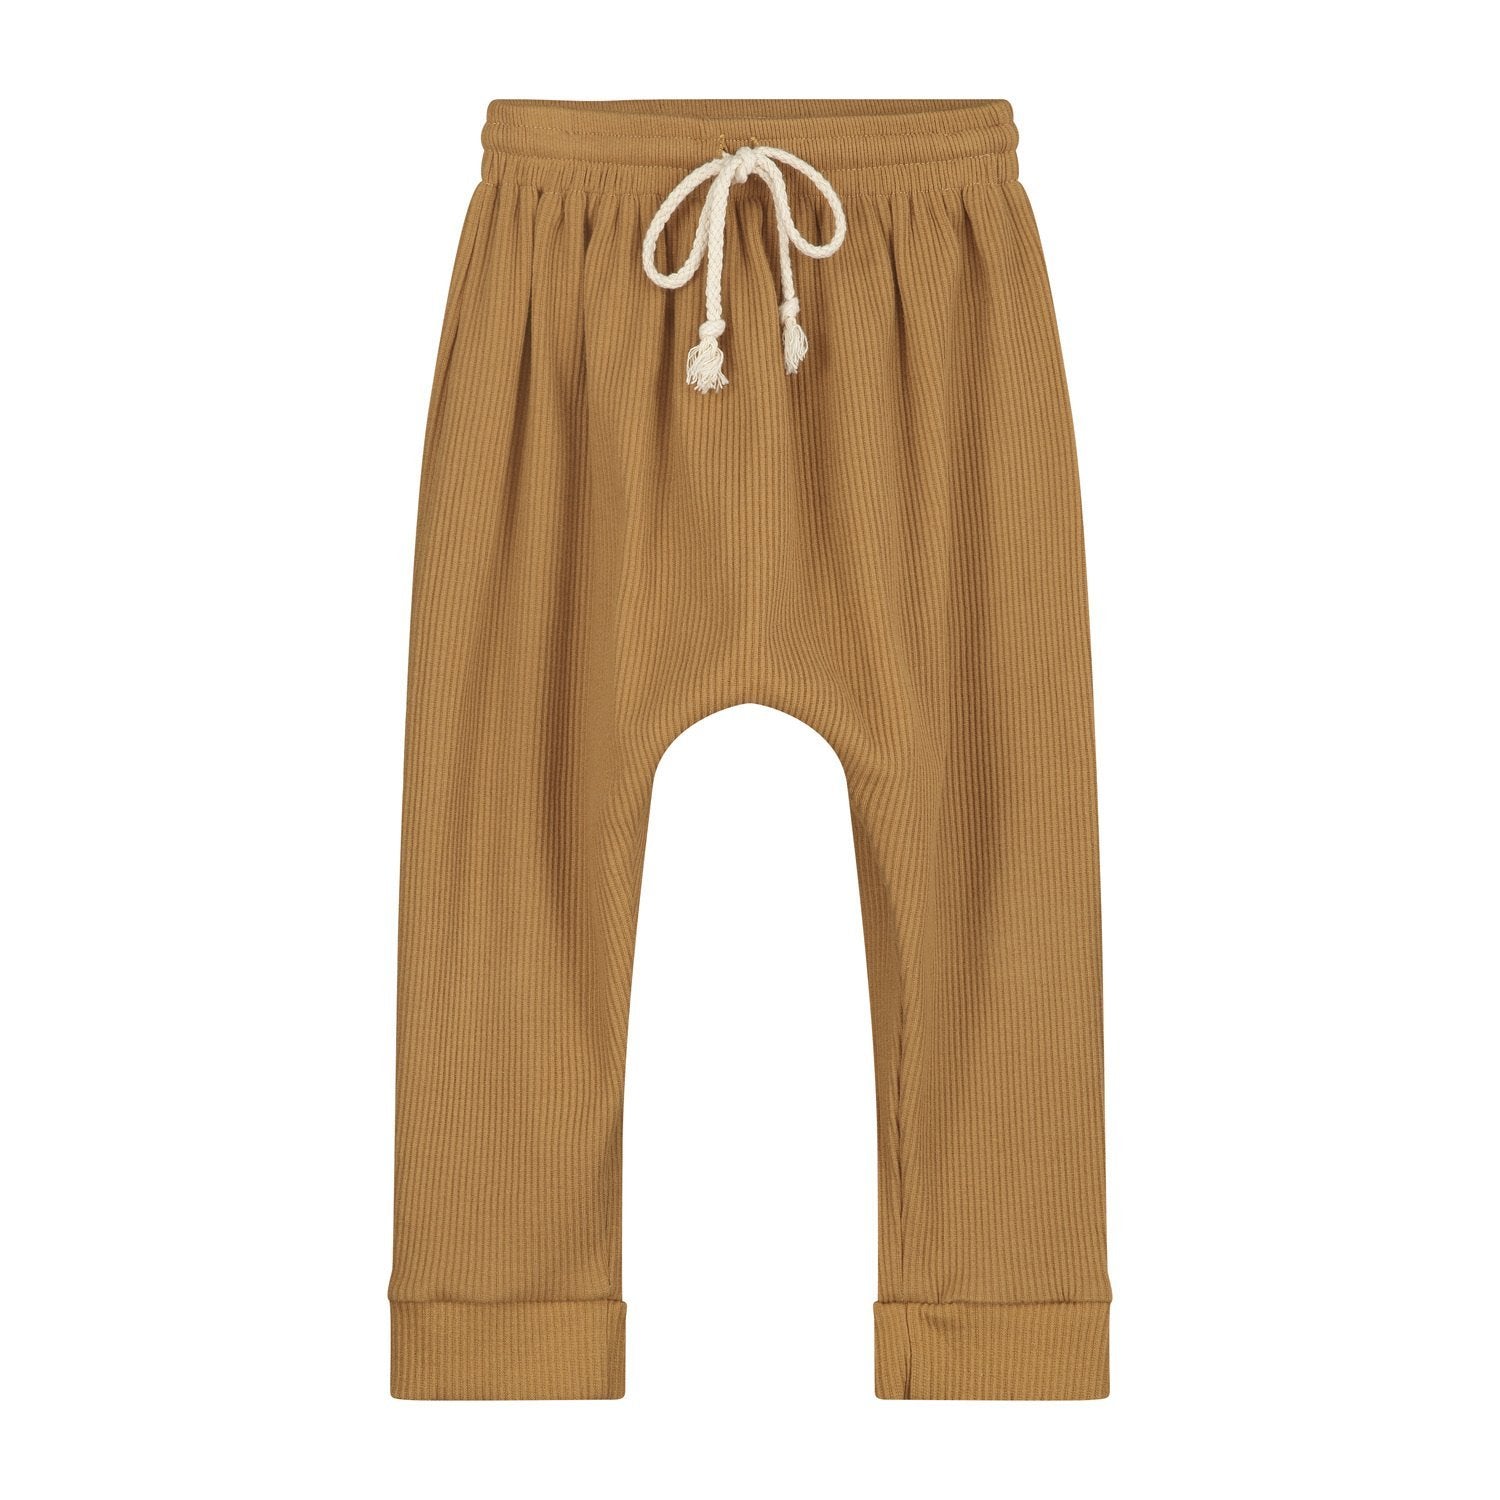 Moos Pants - Hose find Stylish Fashion for Little People- at Little Foxx Concept Store